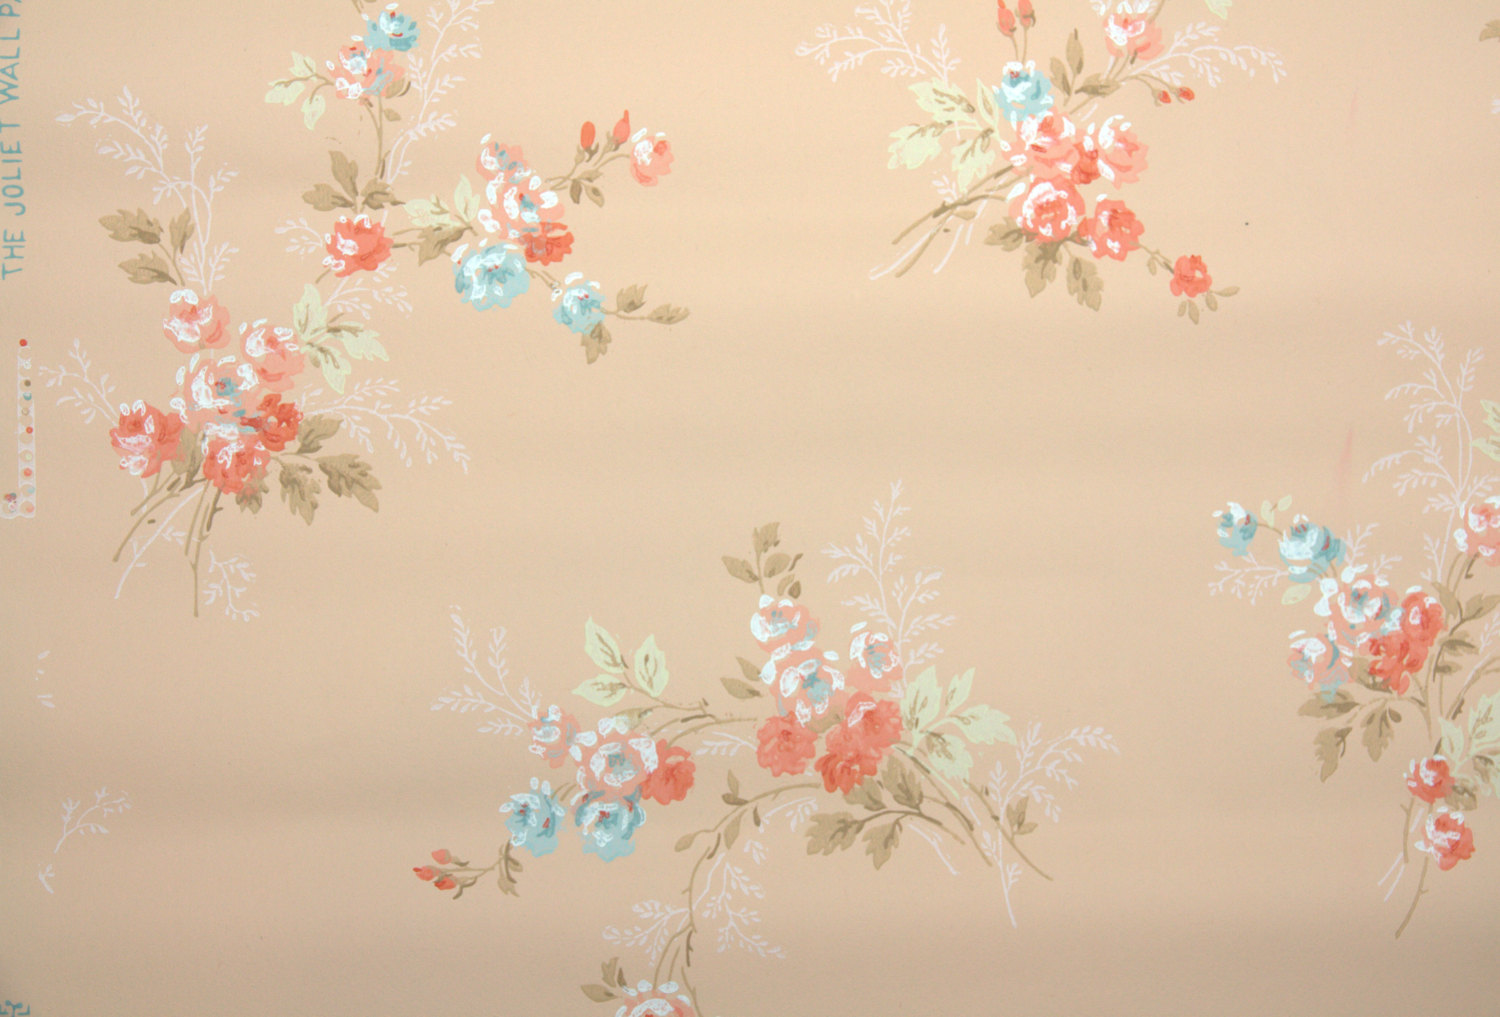 1930s Vintage Wallpaper Floral With By Hannahstreasures